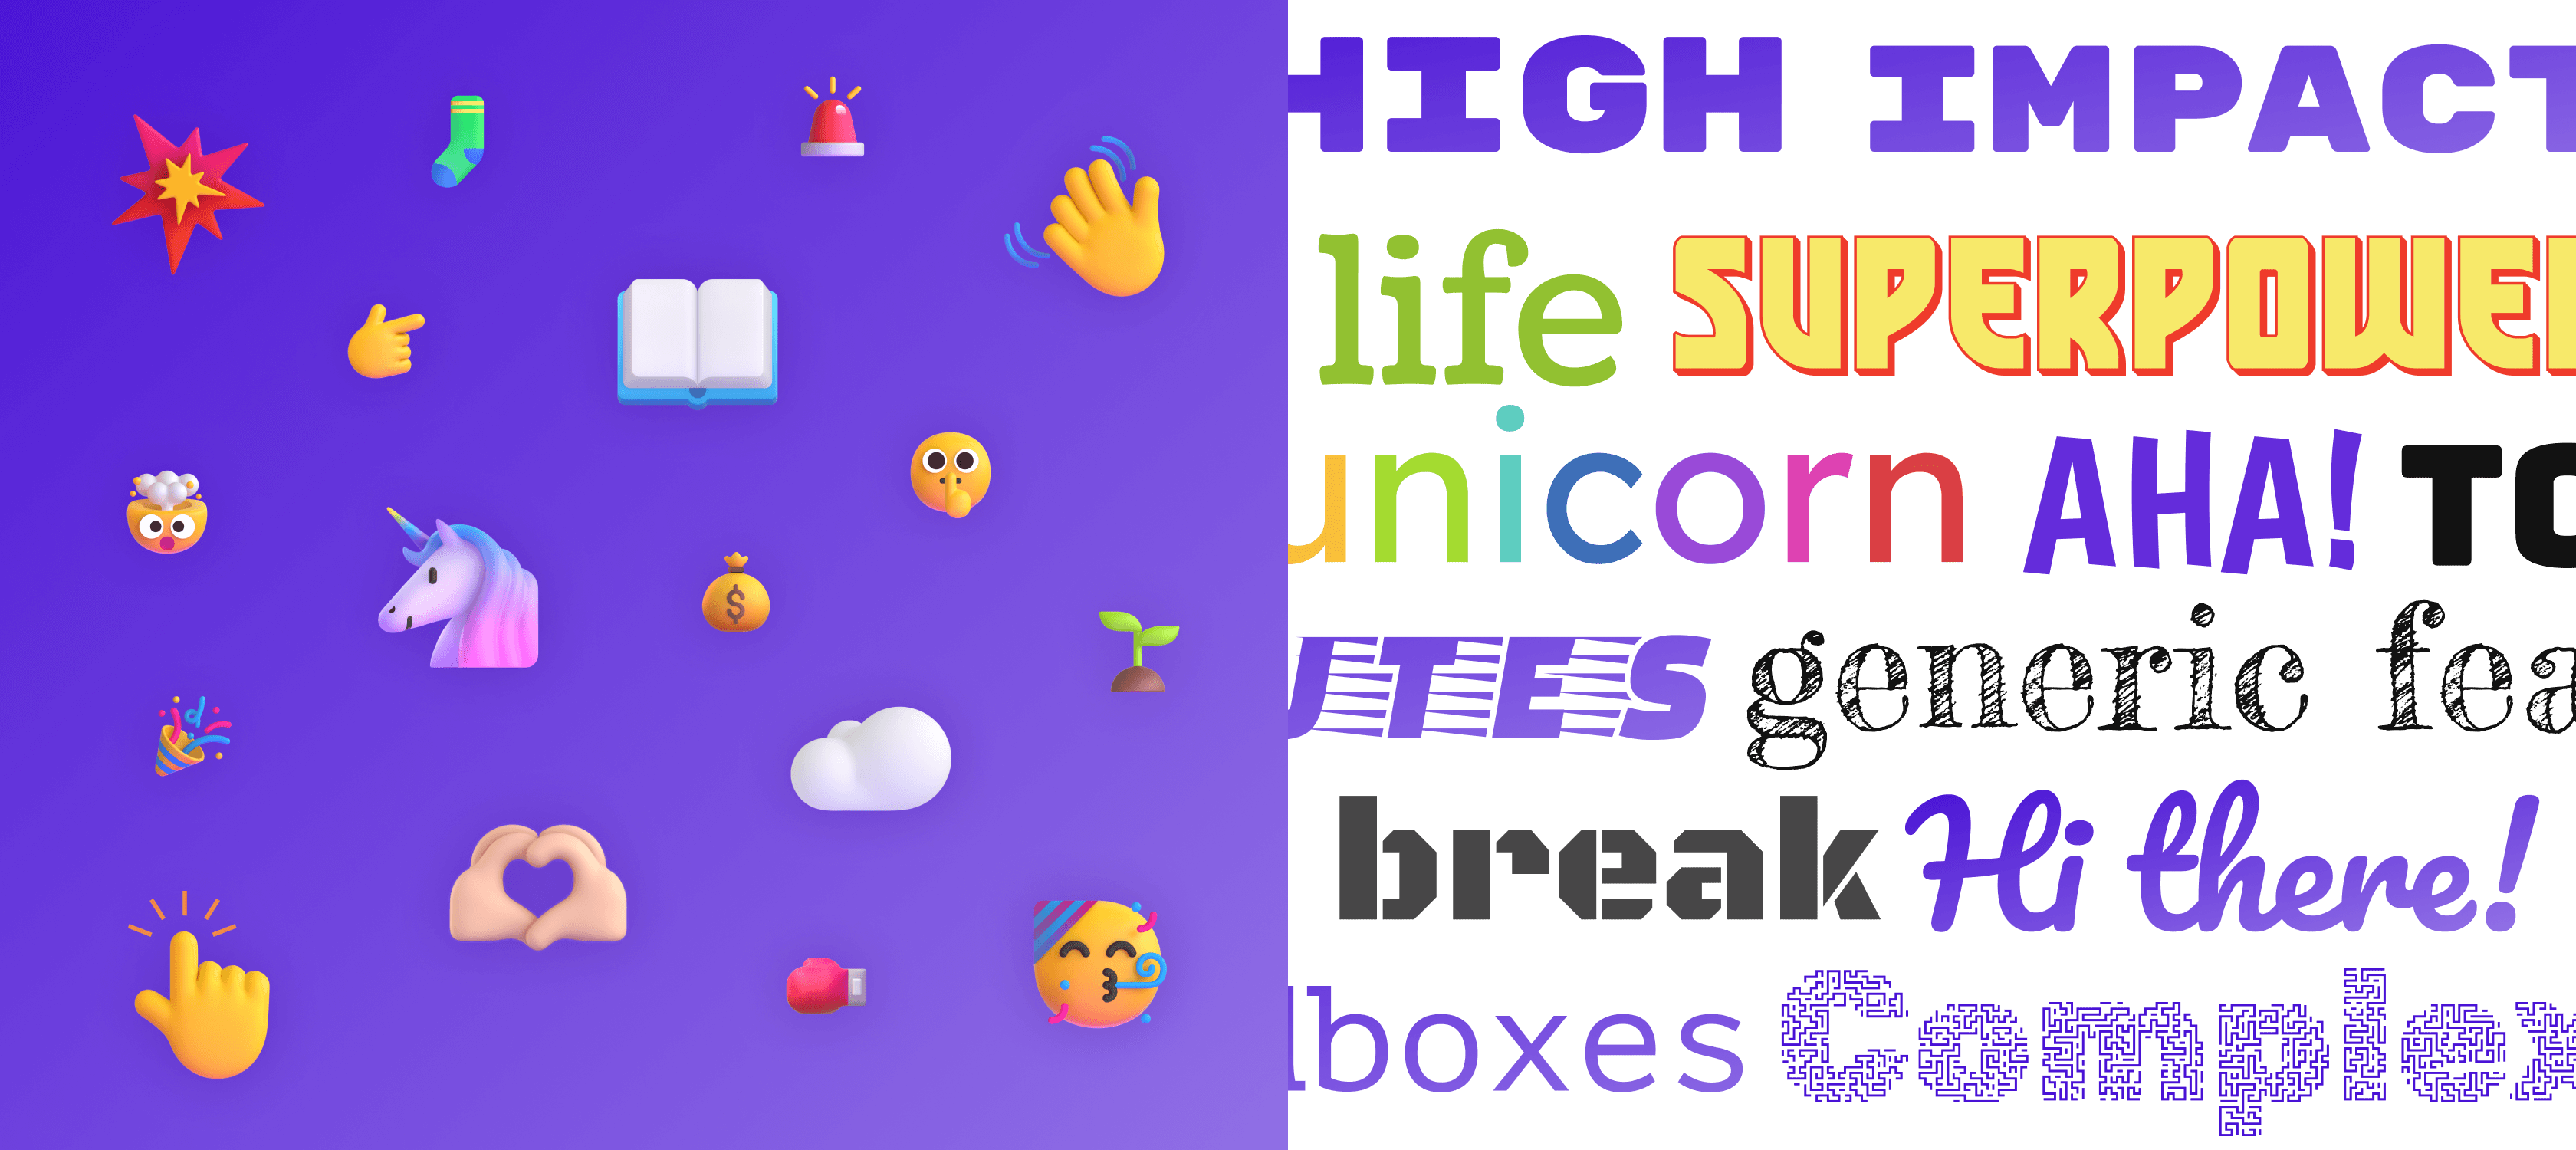 On the left purple square are various emojis spread out; on the right white square are various texts in funky fonts and colours.